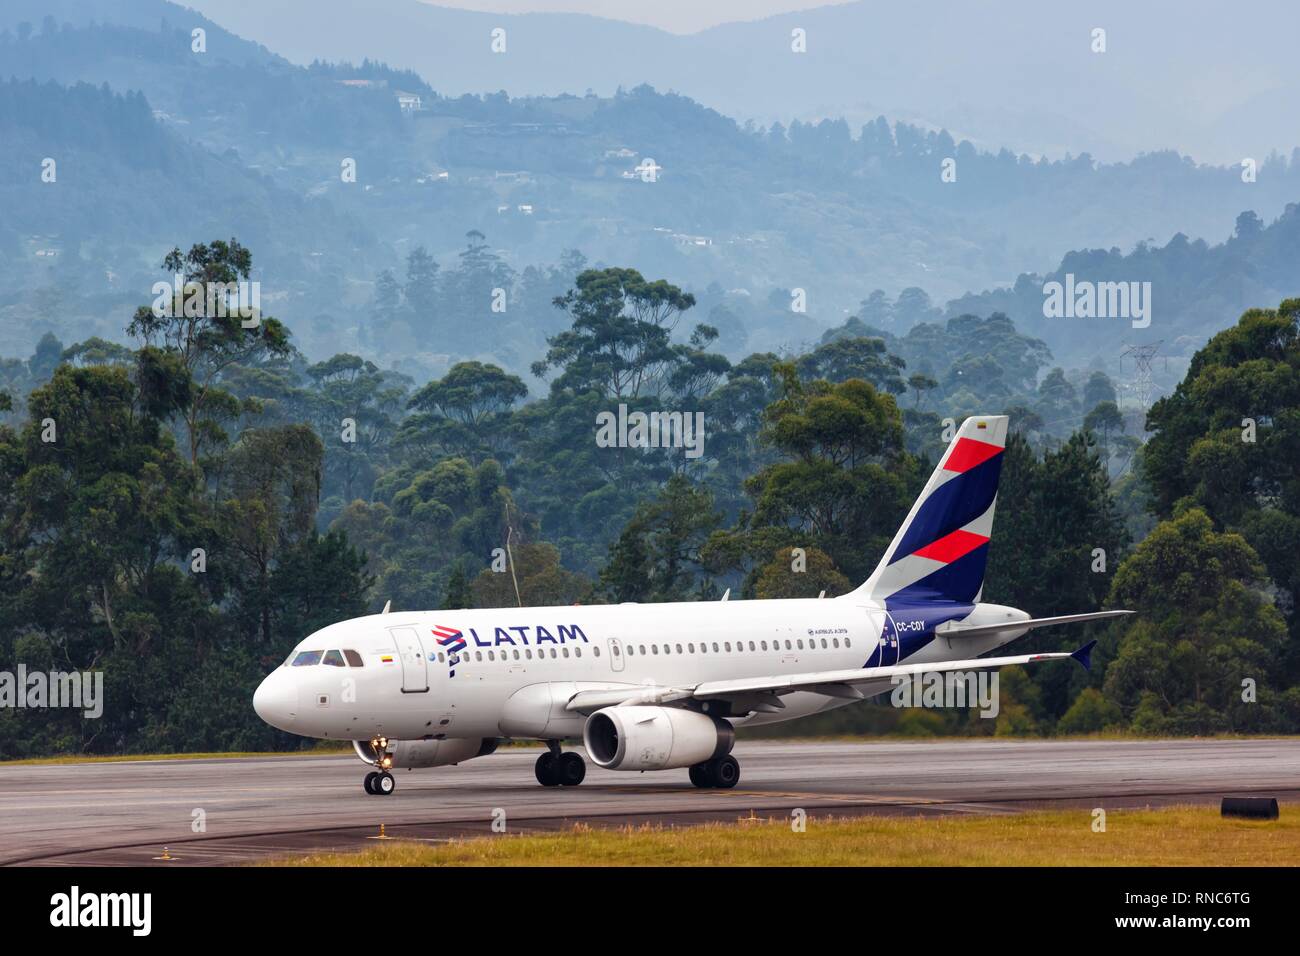 Medellin Colombia January 27 2019 Latam Airbus A319 Airplanes